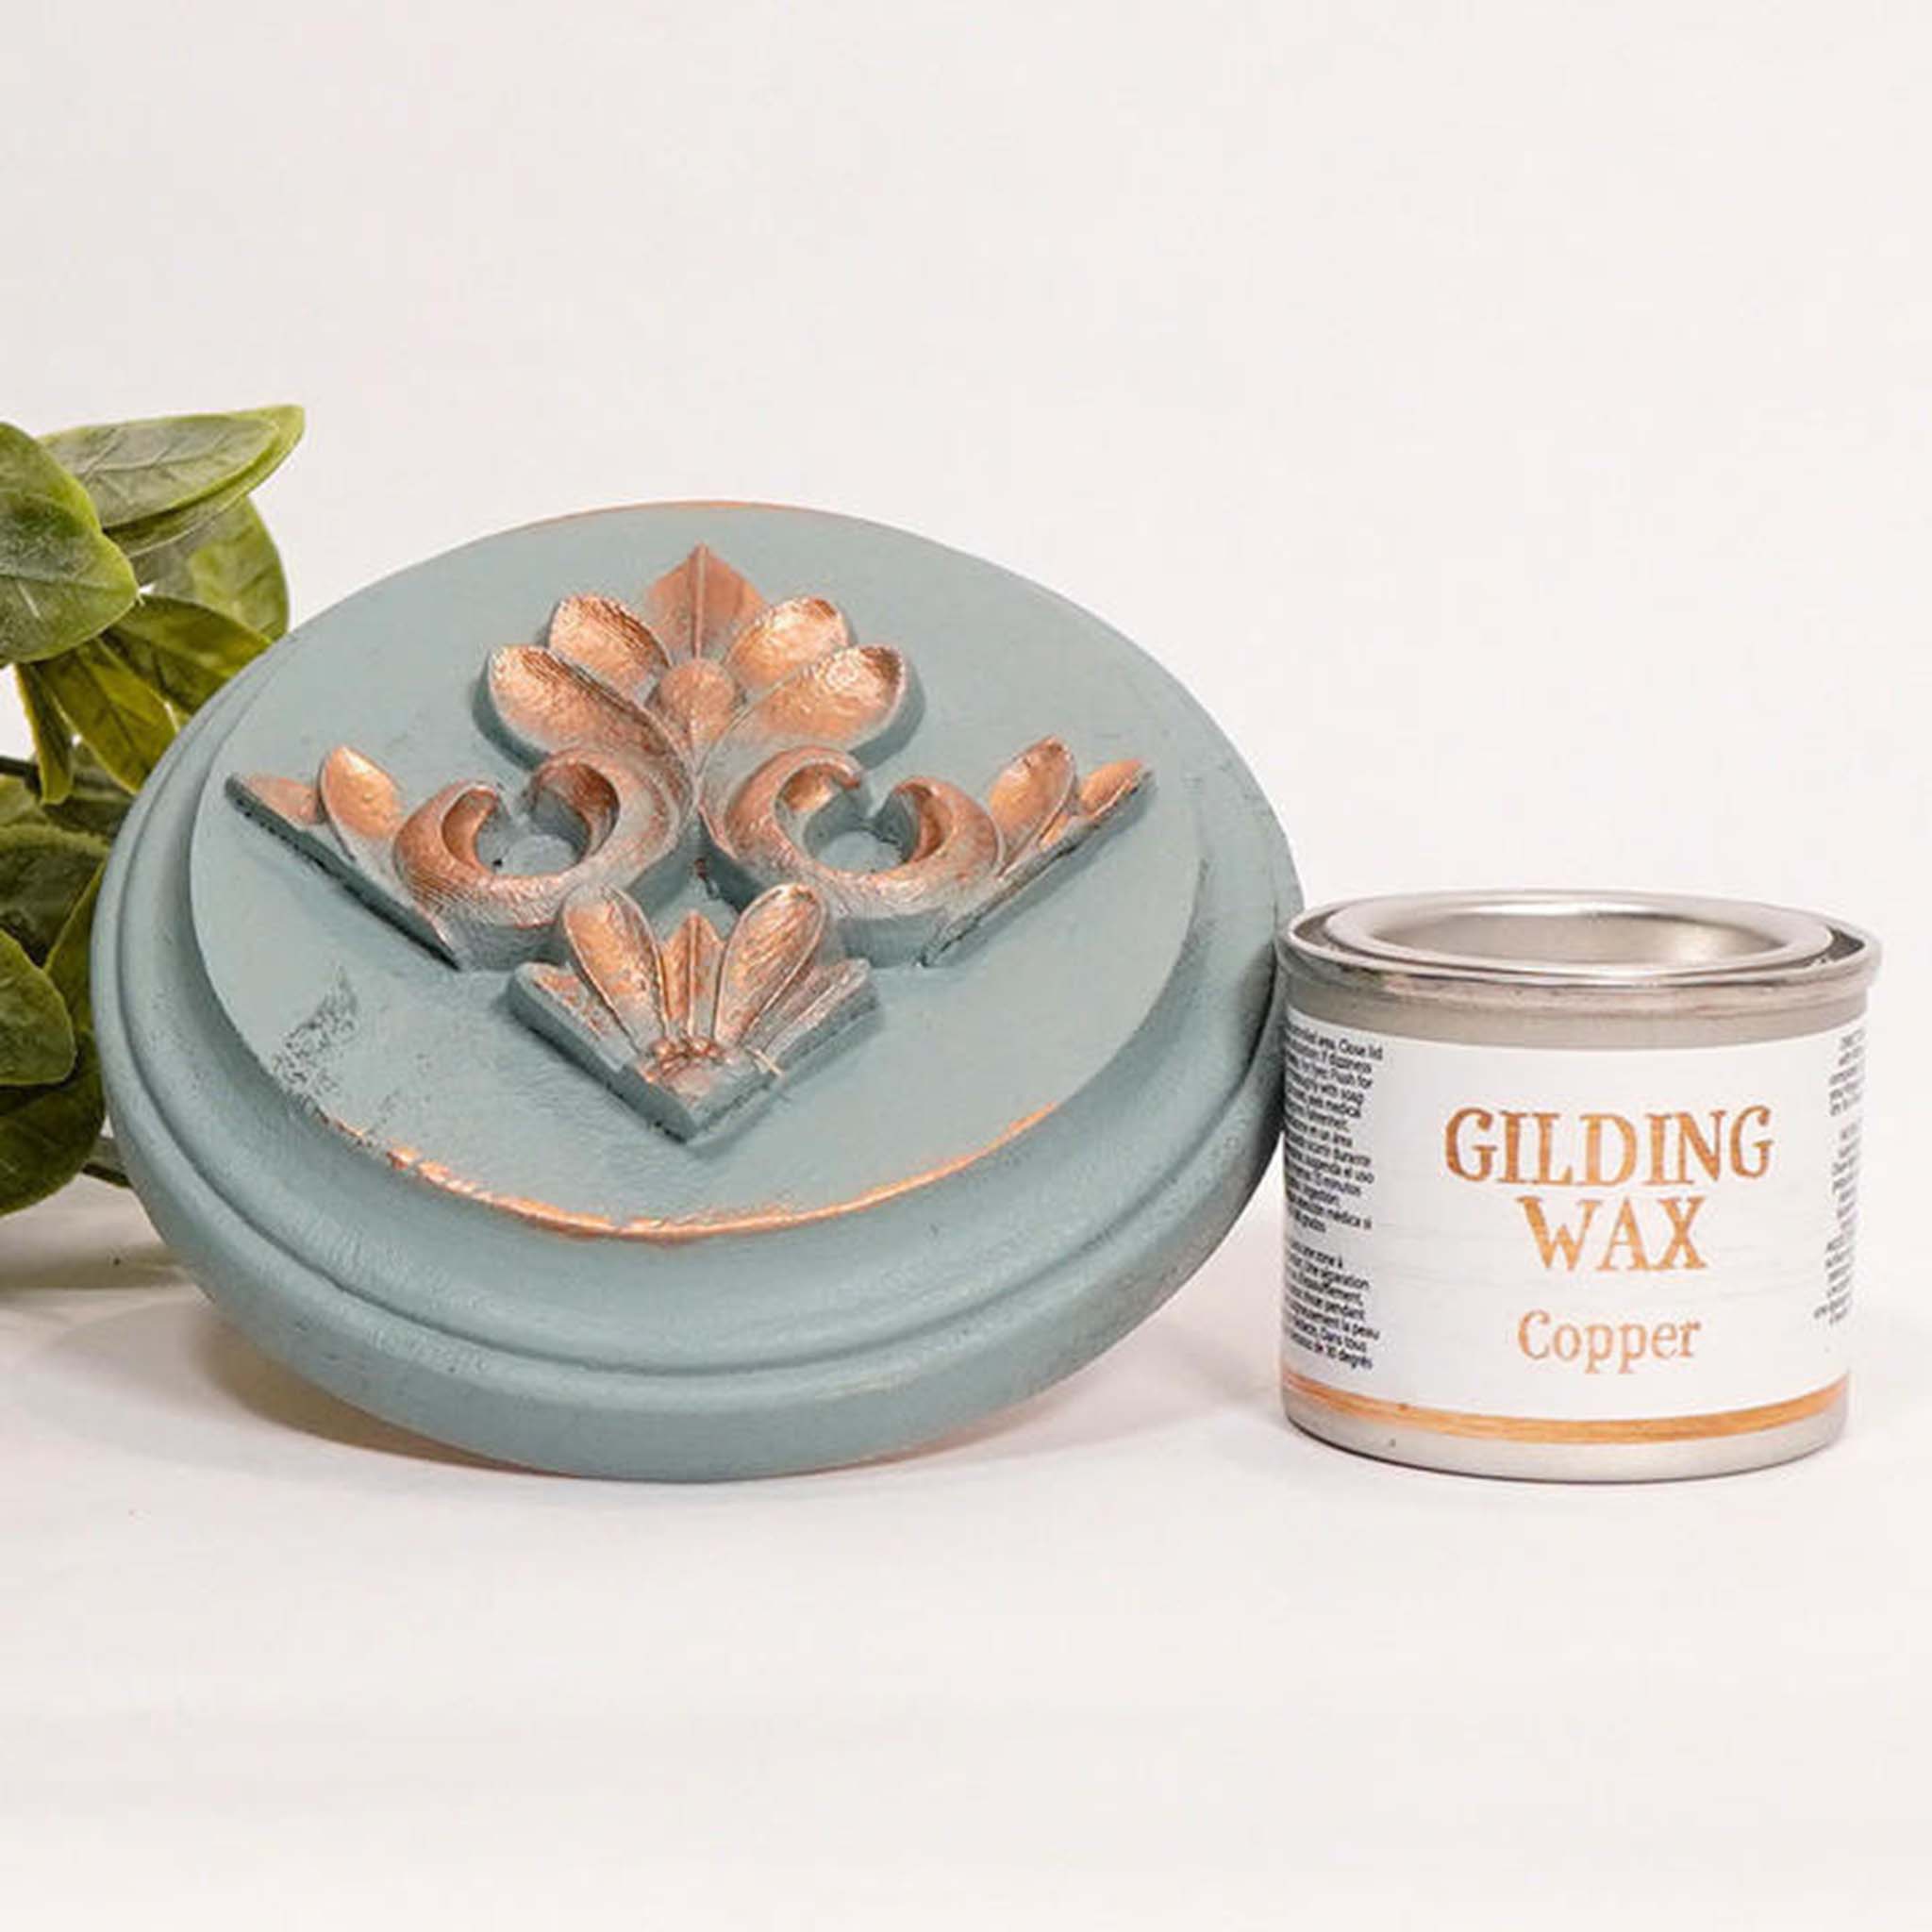 A can of Dixie Belle's Copper Gilding wax is next to a light blue painted round wood sample. The wood sample has an ornate silicone mold casting that features the copper gilding wax on it.